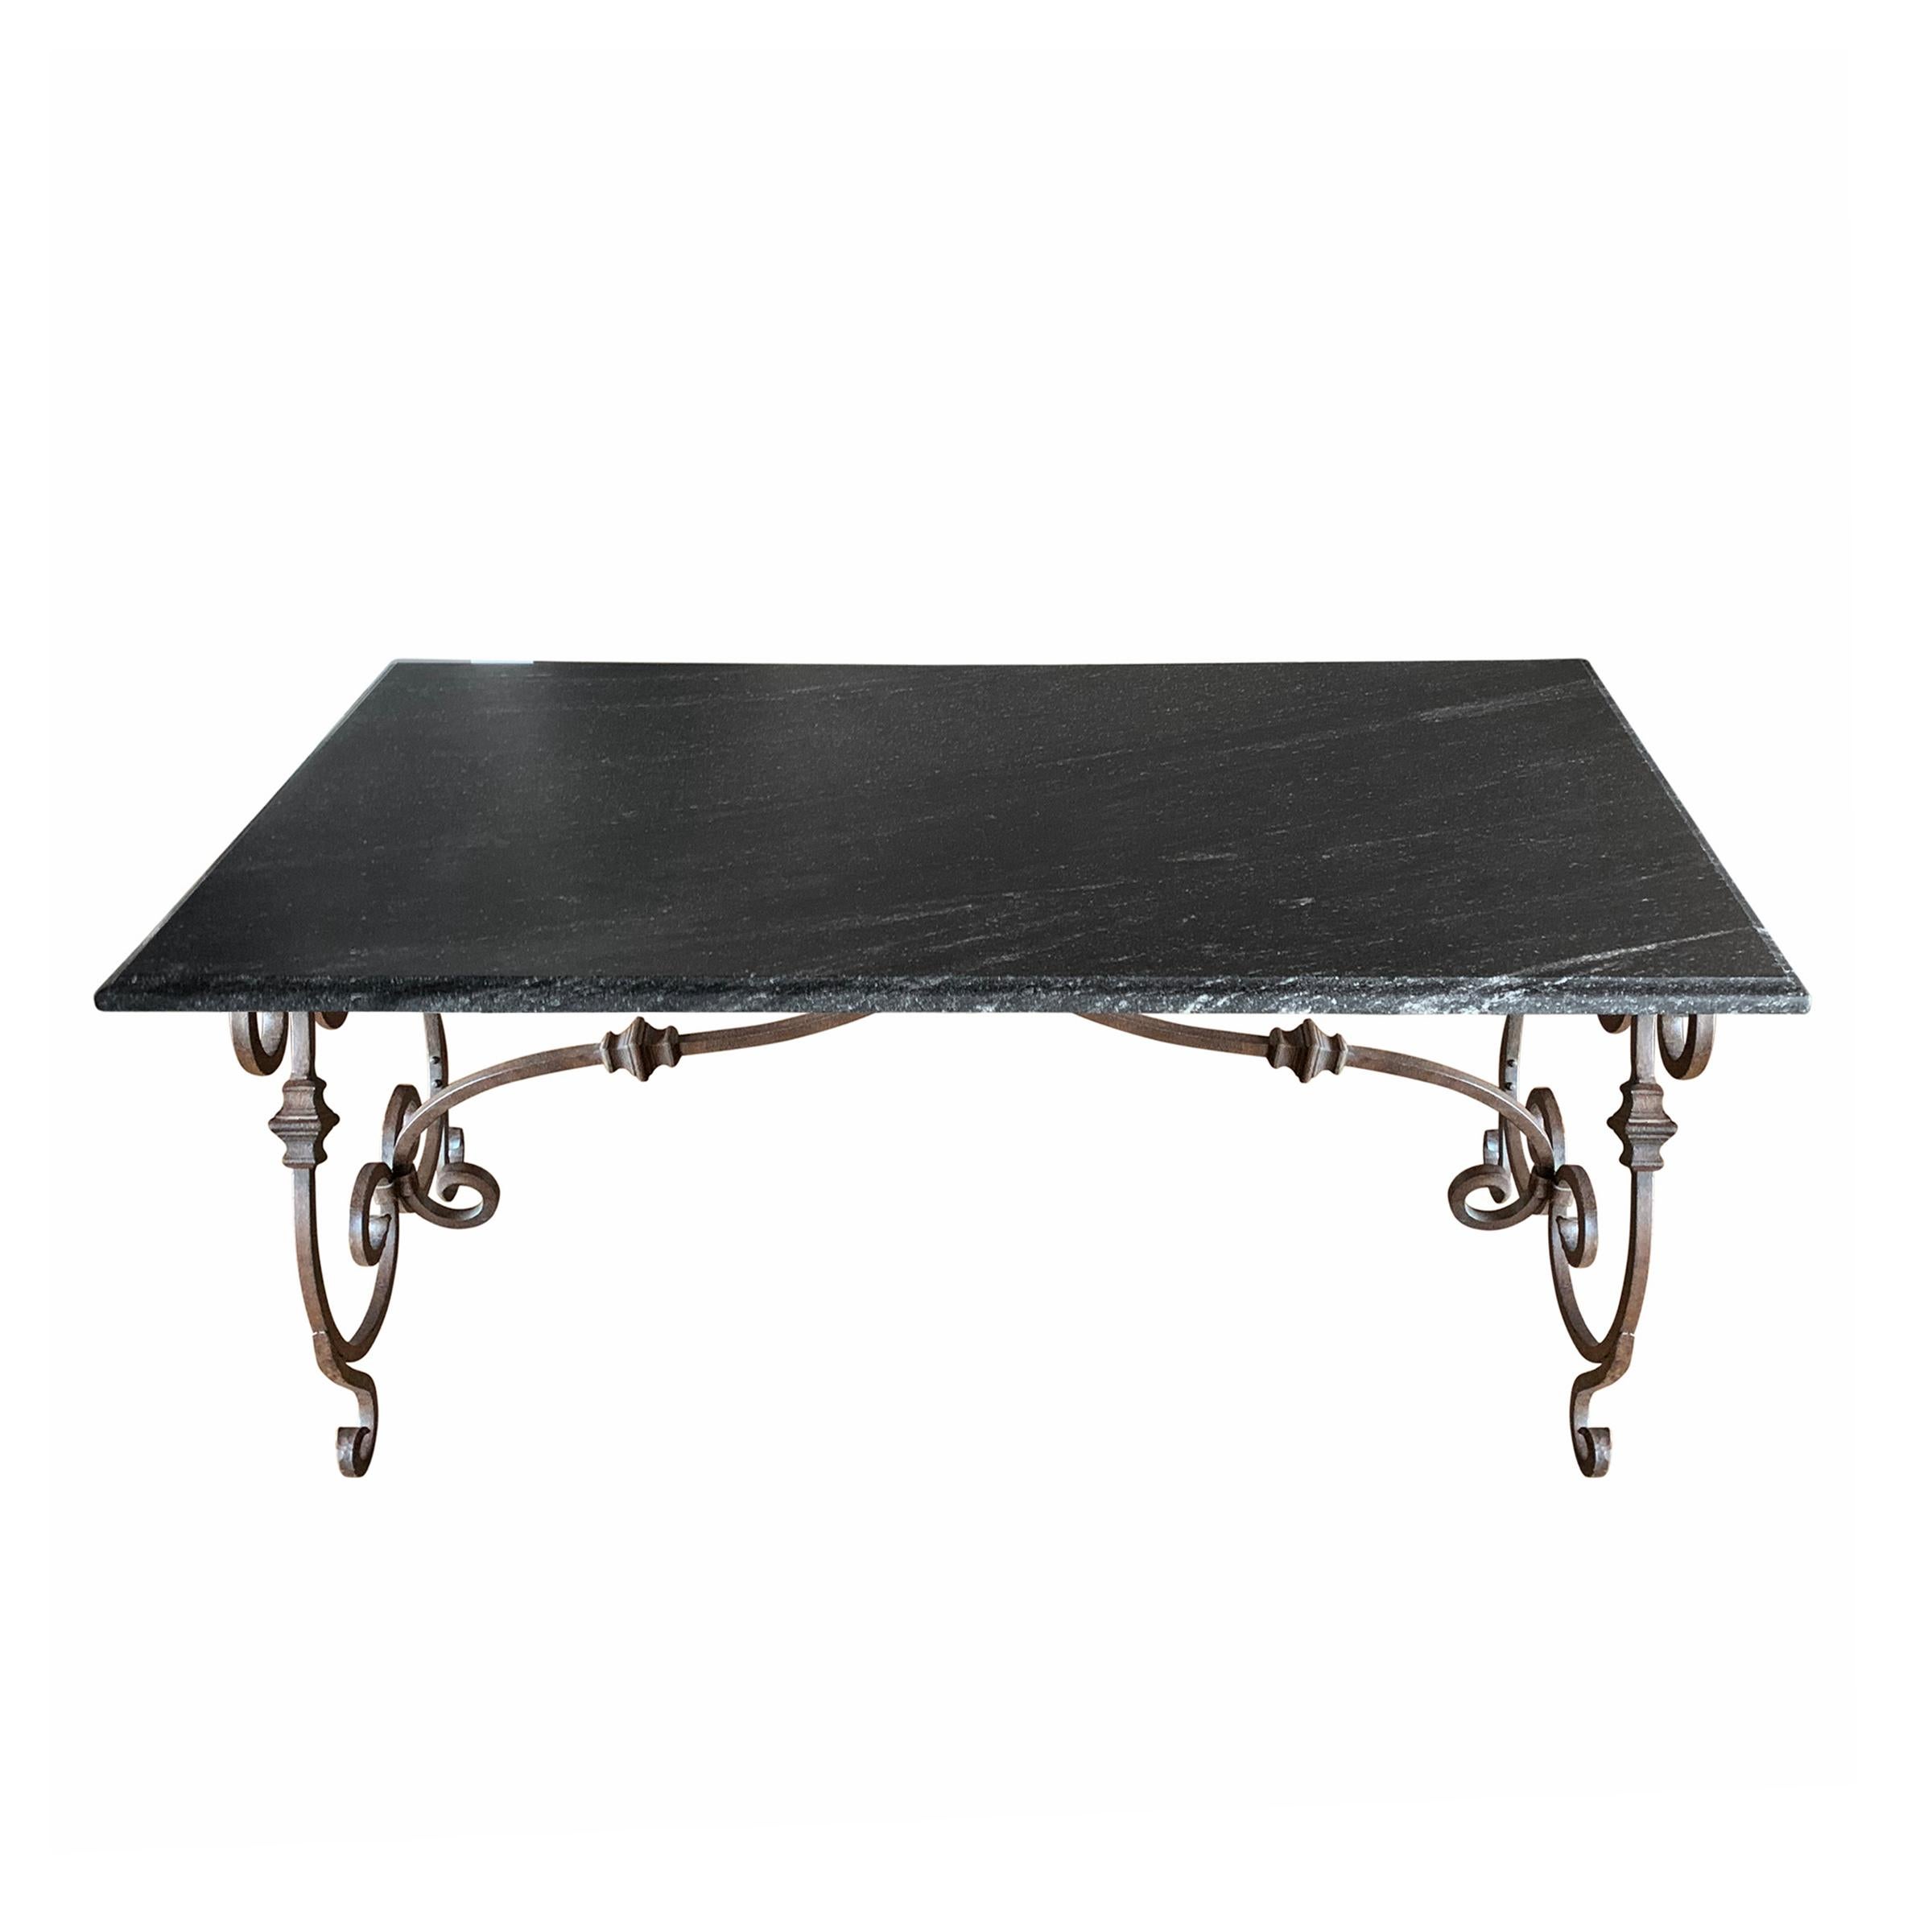 A beautiful late 20th century Italian table with wonderfully scrolled hand-wrought iron base and a black leathered granite top with an ogee edge. The table is the perfect height for a desk, work table, or dining table, but also works perfectly as a